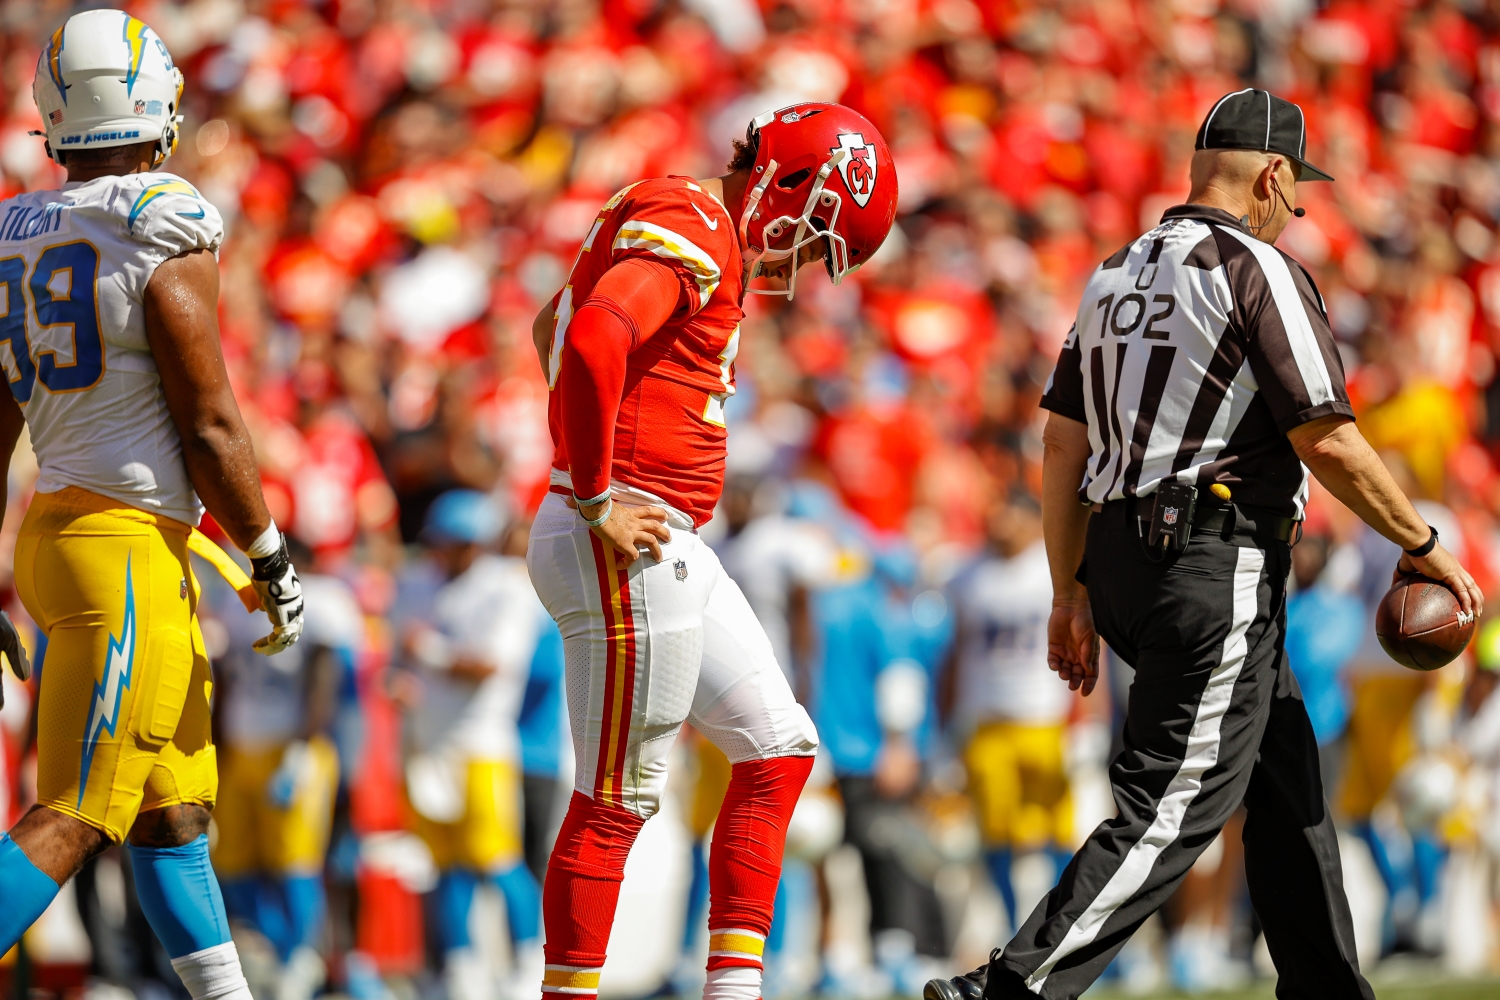 Kansas City Chiefs quarterback Patrick Mahomes walks with his head down after a play against the Los Angeles Chargers.